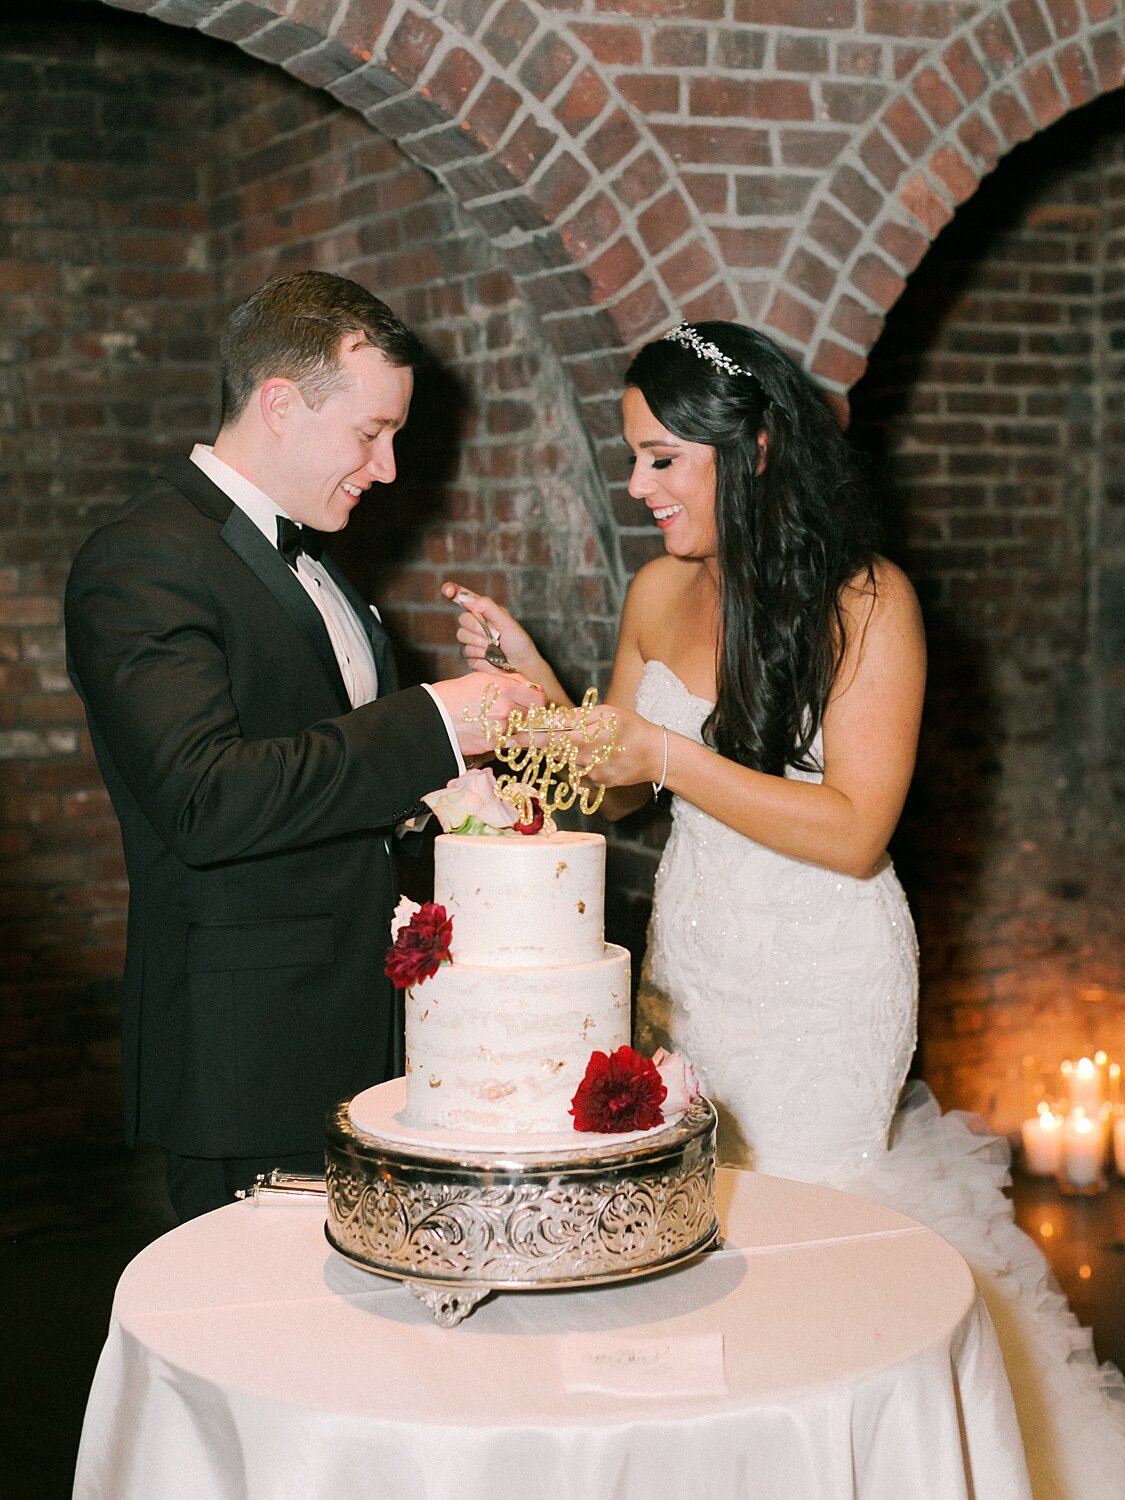 cake cutting with cake from Mini Melanie photographed by Asher Gardner Photography